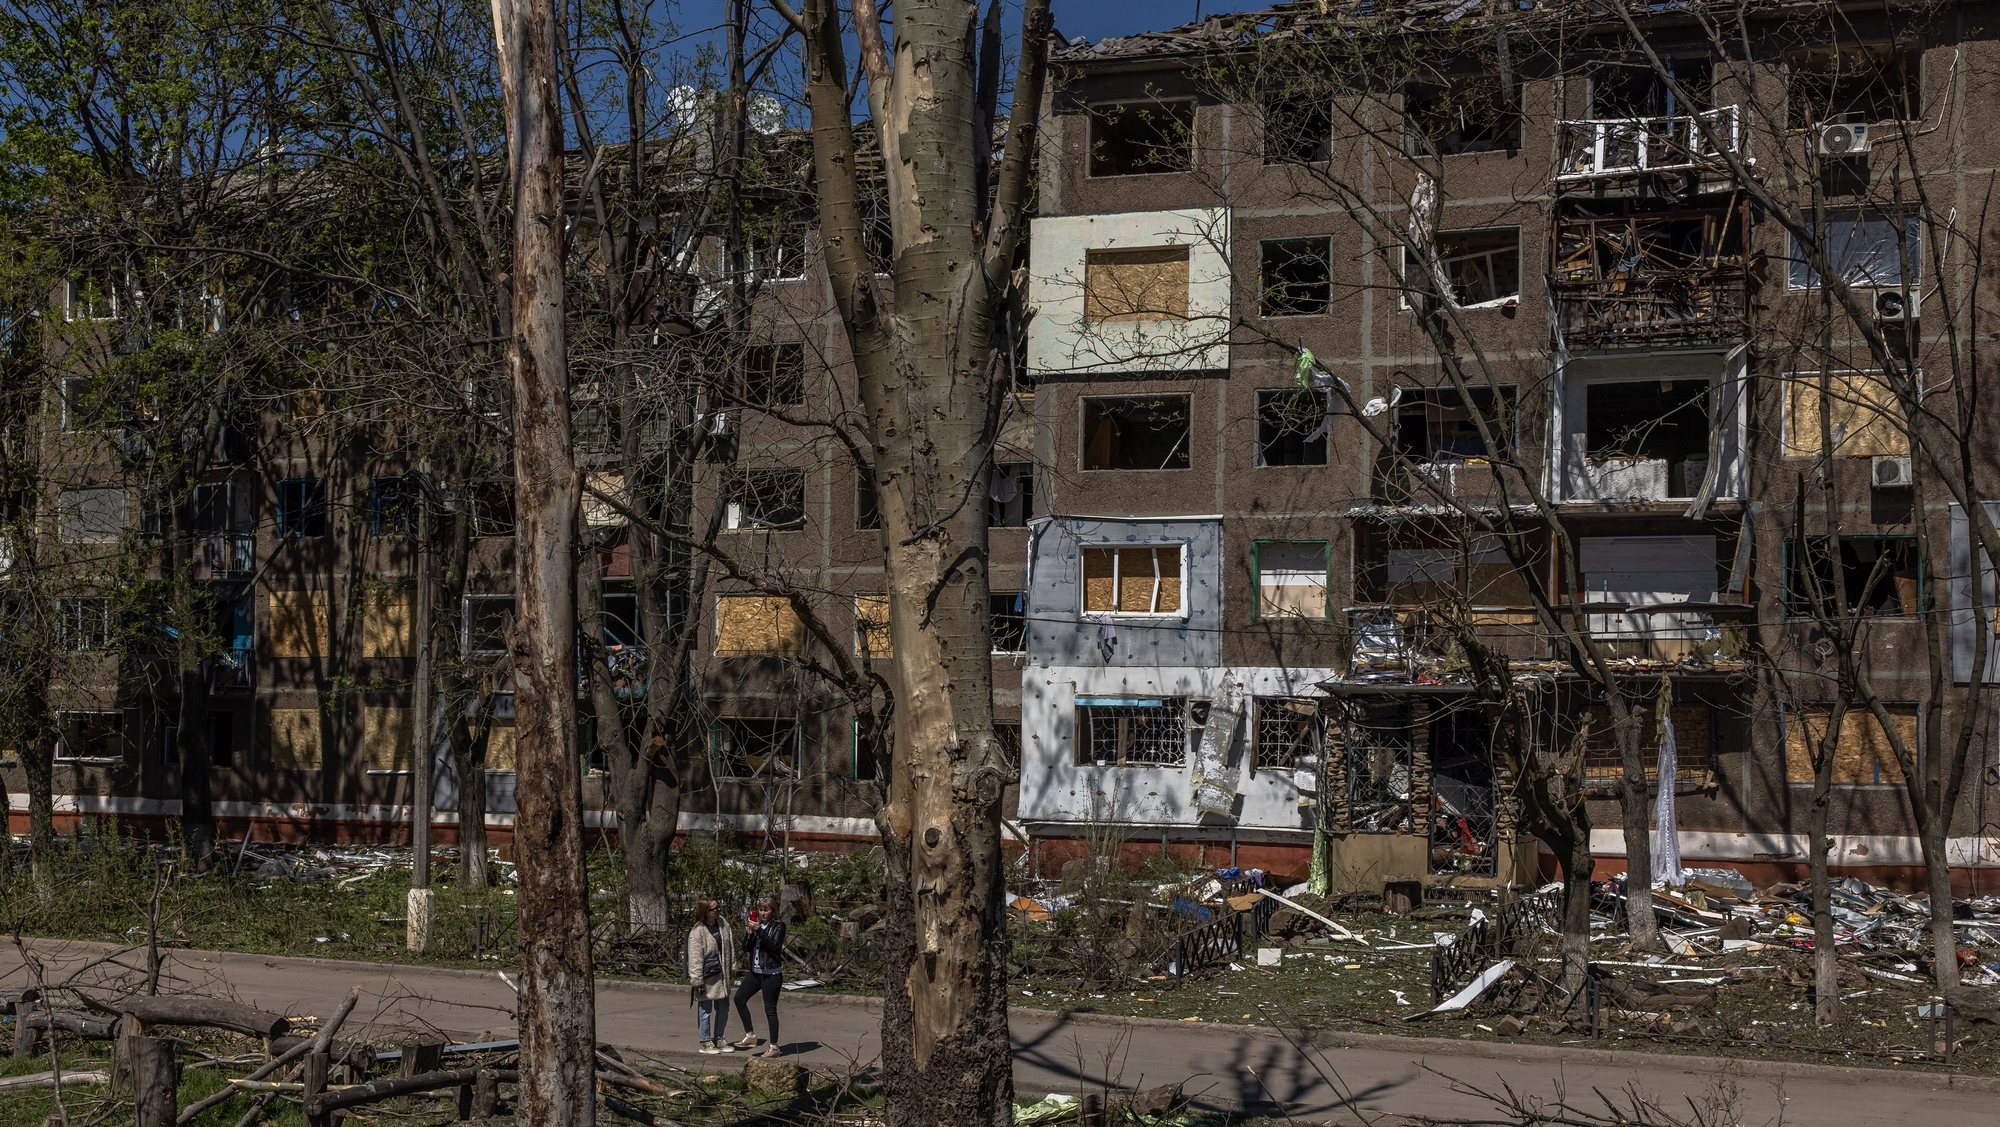 epa09930620 Women stand next to a damaged apartment building after the recent Russian airstrike, in Kramatorsk, Donetsk region, eastern Ukraine, 06 May 2022. After pulling back its army from near the capital Kyiv, Russia moved its main focus to the east of Ukraine, attacking it from different directions. On 24 February, Russian troops invaded Ukrainian territory starting a conflict that has provoked destruction and a humanitarian crisis. According to the United Nations High Commission for the Refugees (UNHCR) last report on the situation of Ukraine released on 05 May, more than 5.7 million refugees have fled Ukraine making this the fastest growing refugee crisis since World War II.  EPA/ROMAN PILIPEY